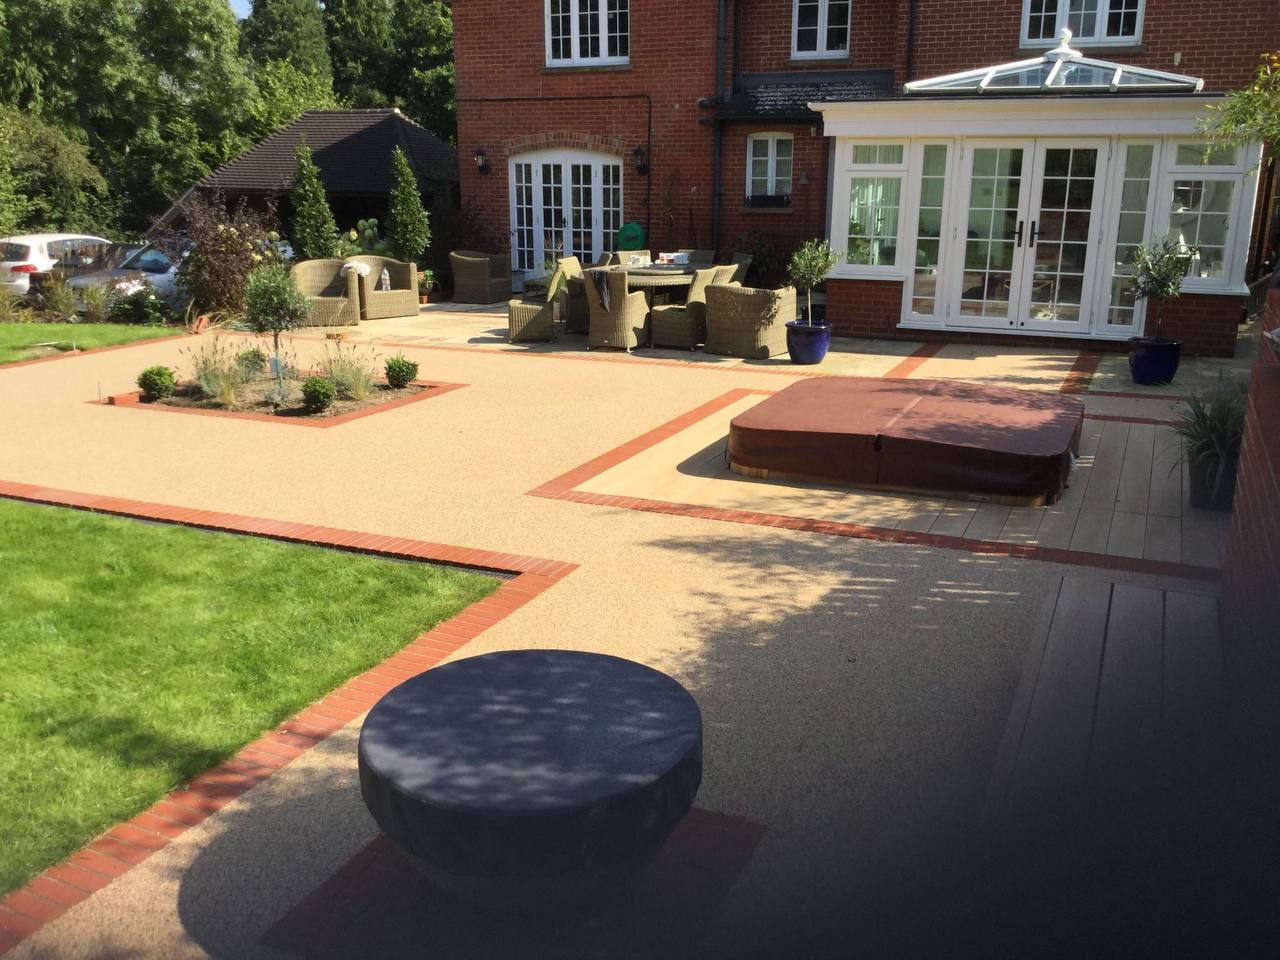 This is a photo of a Resin bound patio carried out in Liverpool. All works done by Bury Resin Driveways Liverpool